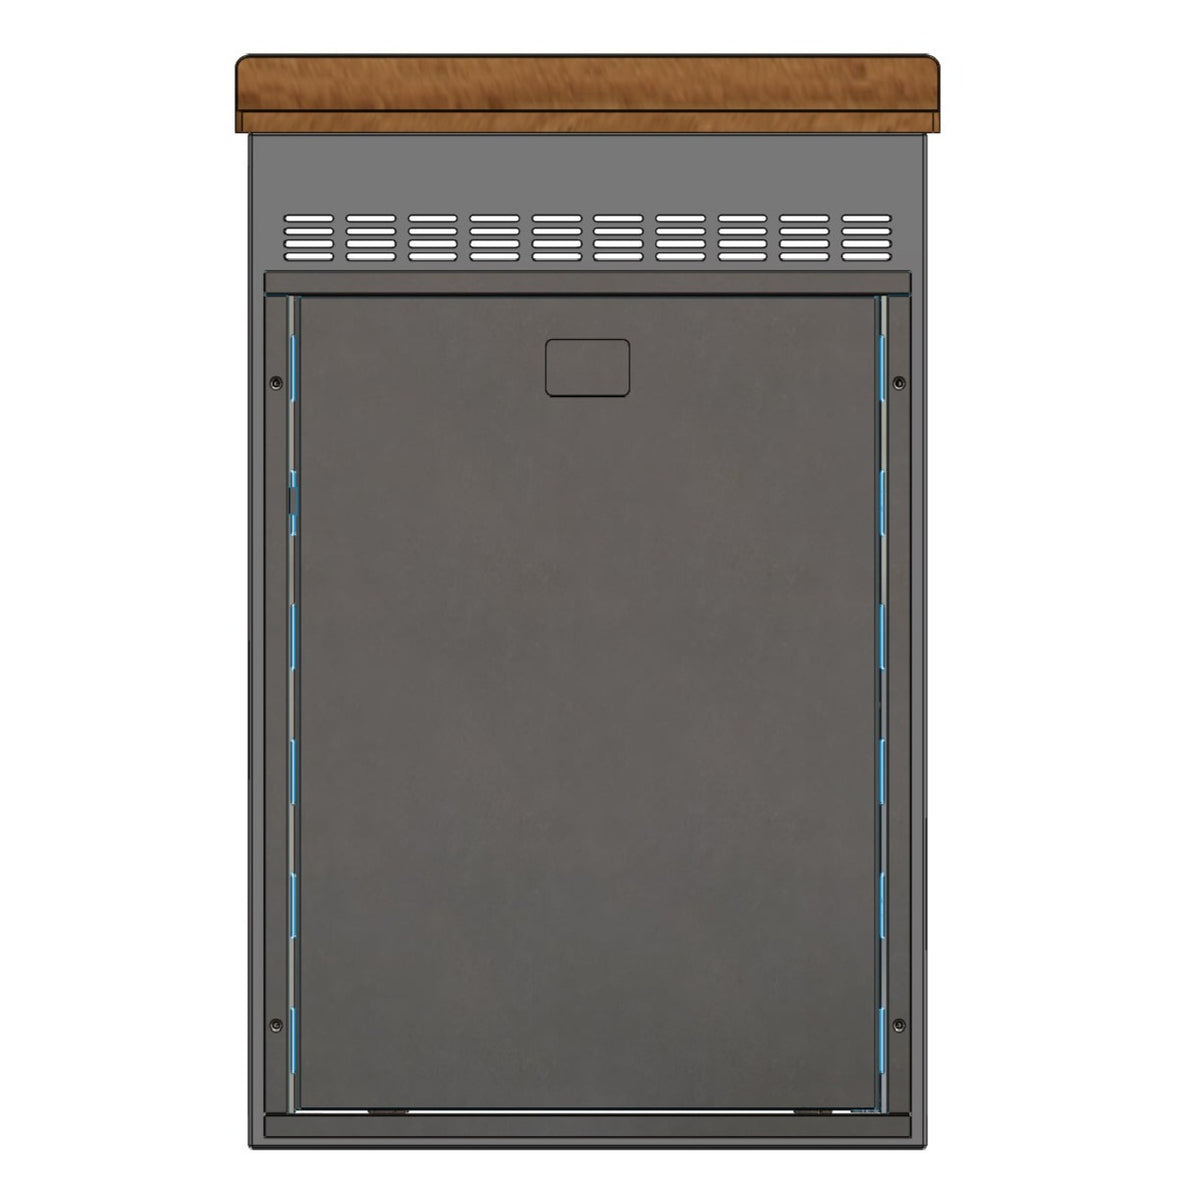 24in Galley - Isotherm 130 Fridge Base Cabinet